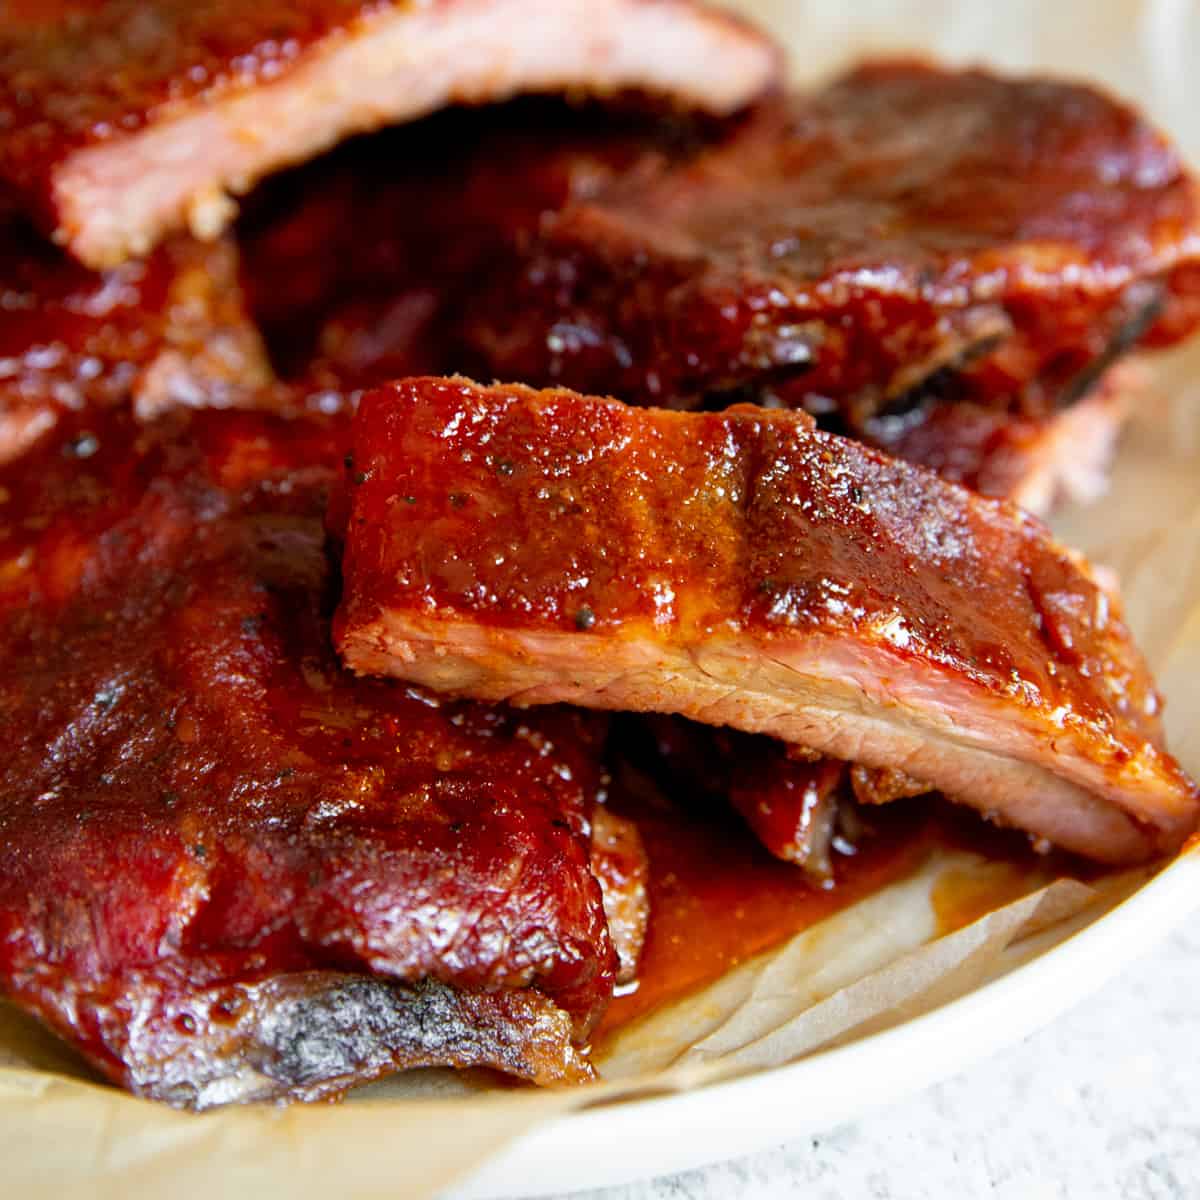 Competition style spare ribs smoked 3 ways : wrapped vs unwrapped foil vs butcher  paper best recipe? 